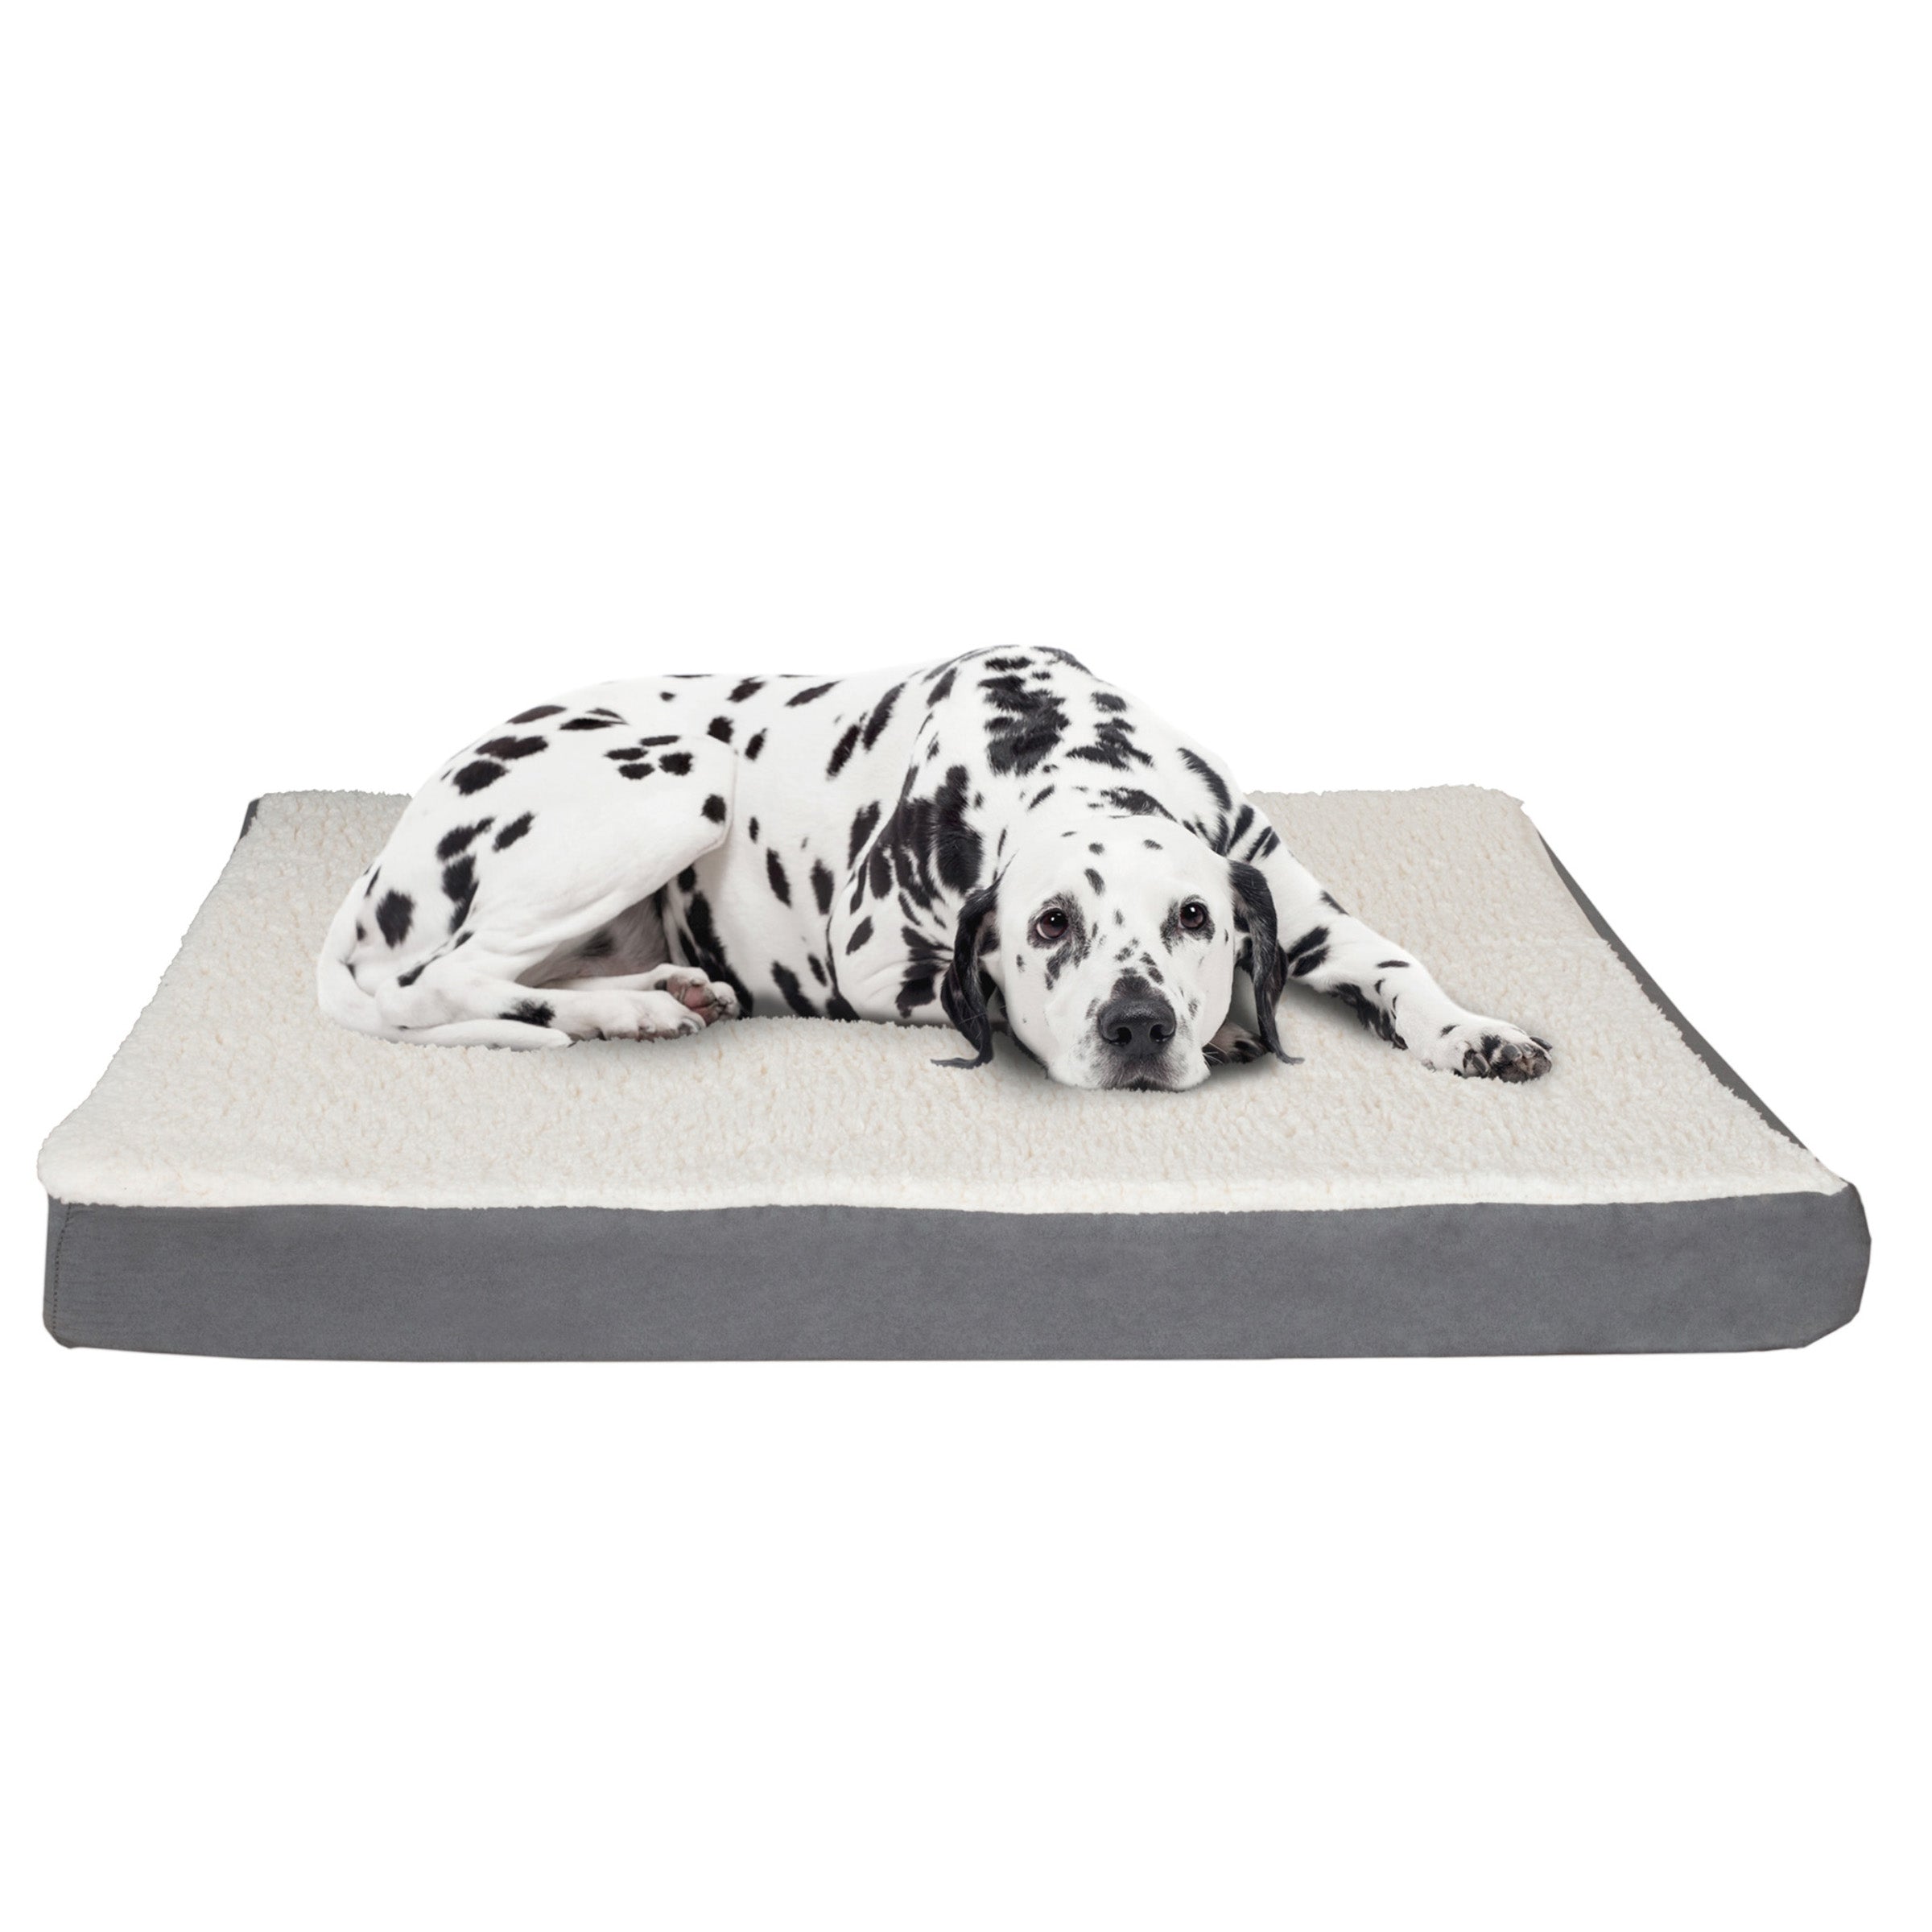 Orthopedic Dog Bed - 2-Layer 44x35-Inch Memory Foam Pet Mattress with Machine-Washable Sherpa Cover for Large Dogs up to 100lbs by PETMAKER (Gray)